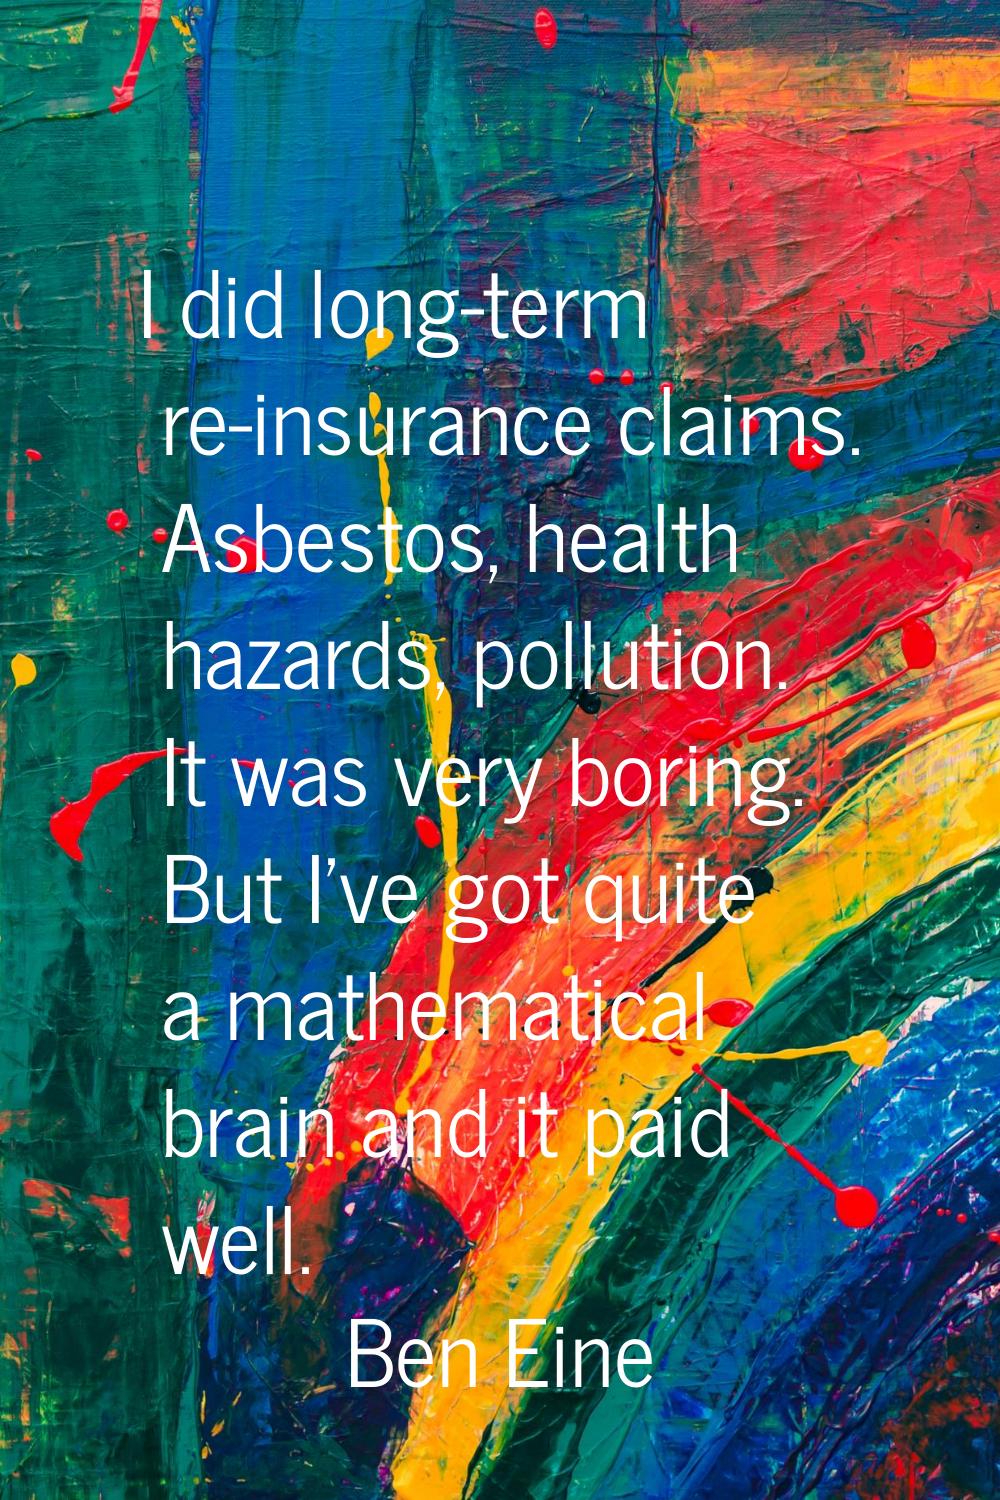 I did long-term re-insurance claims. Asbestos, health hazards, pollution. It was very boring. But I